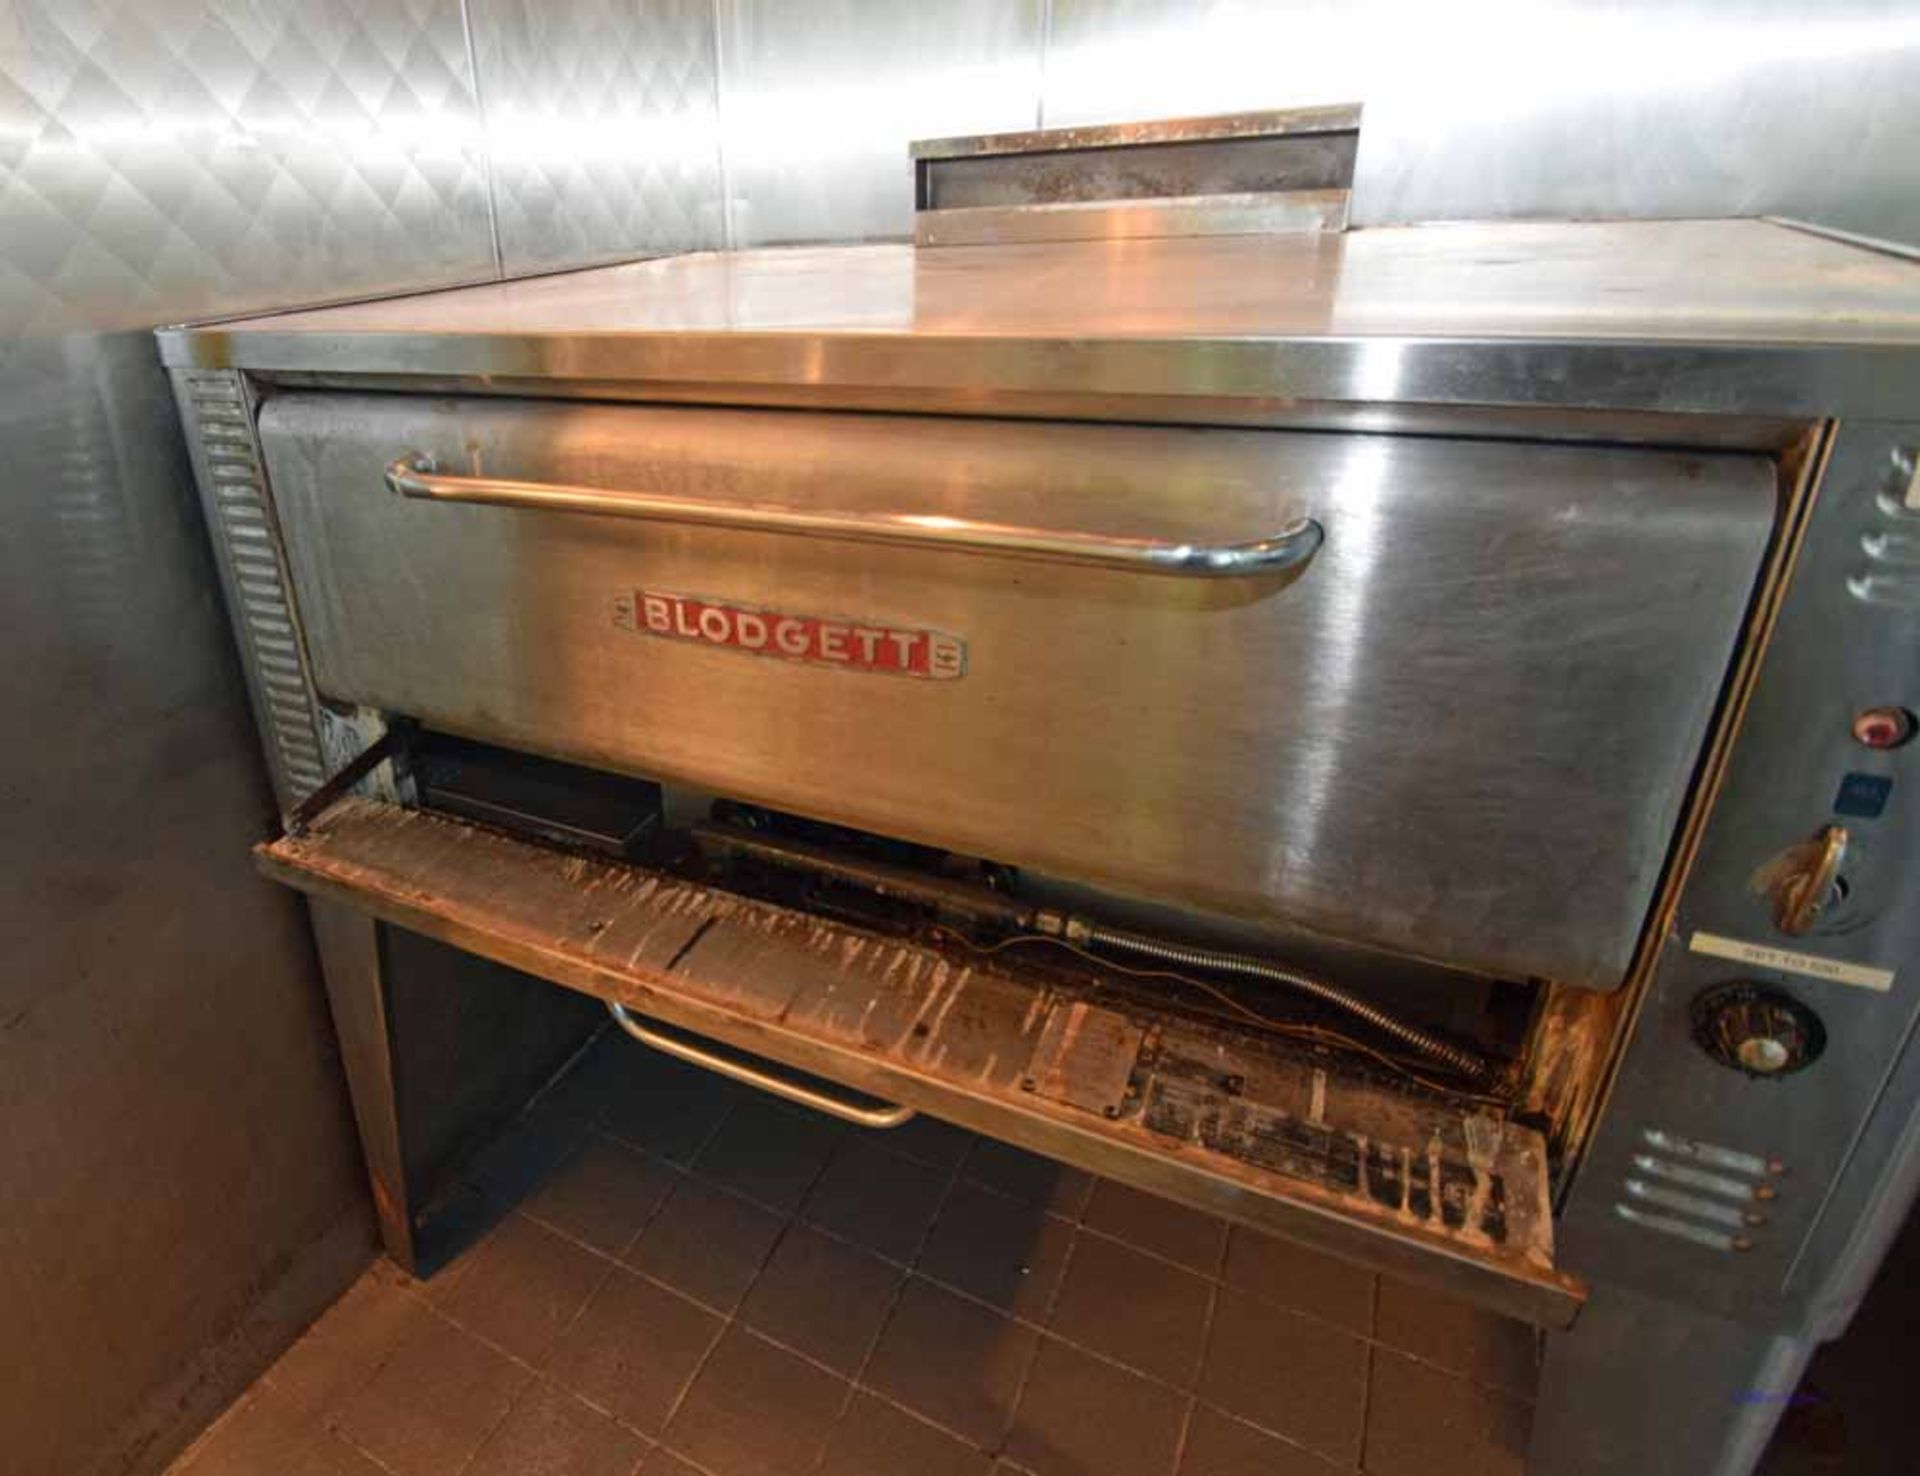 Blodgett 961P Single Pizza Deck Oven 60" Wide - Image 3 of 6